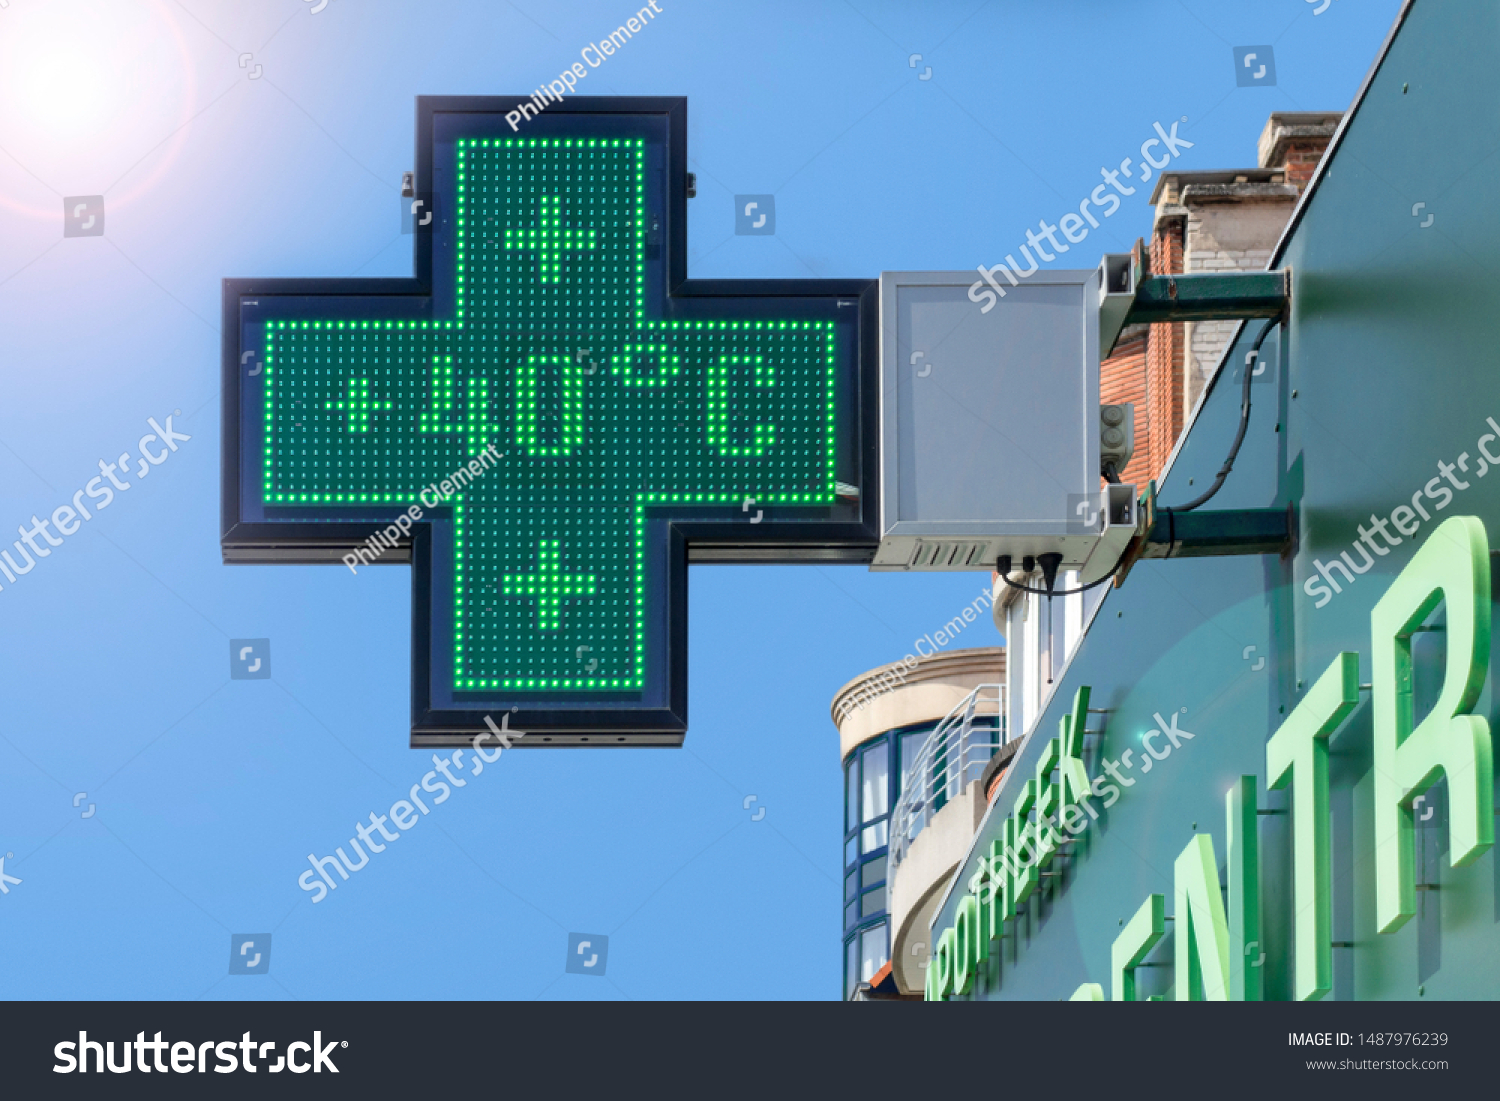 Thermometer in green pharmacy screen sign displays extremely hot temperature of 40 degrees Celsius during heatwave / heat wave in summer in Belgium #1487976239